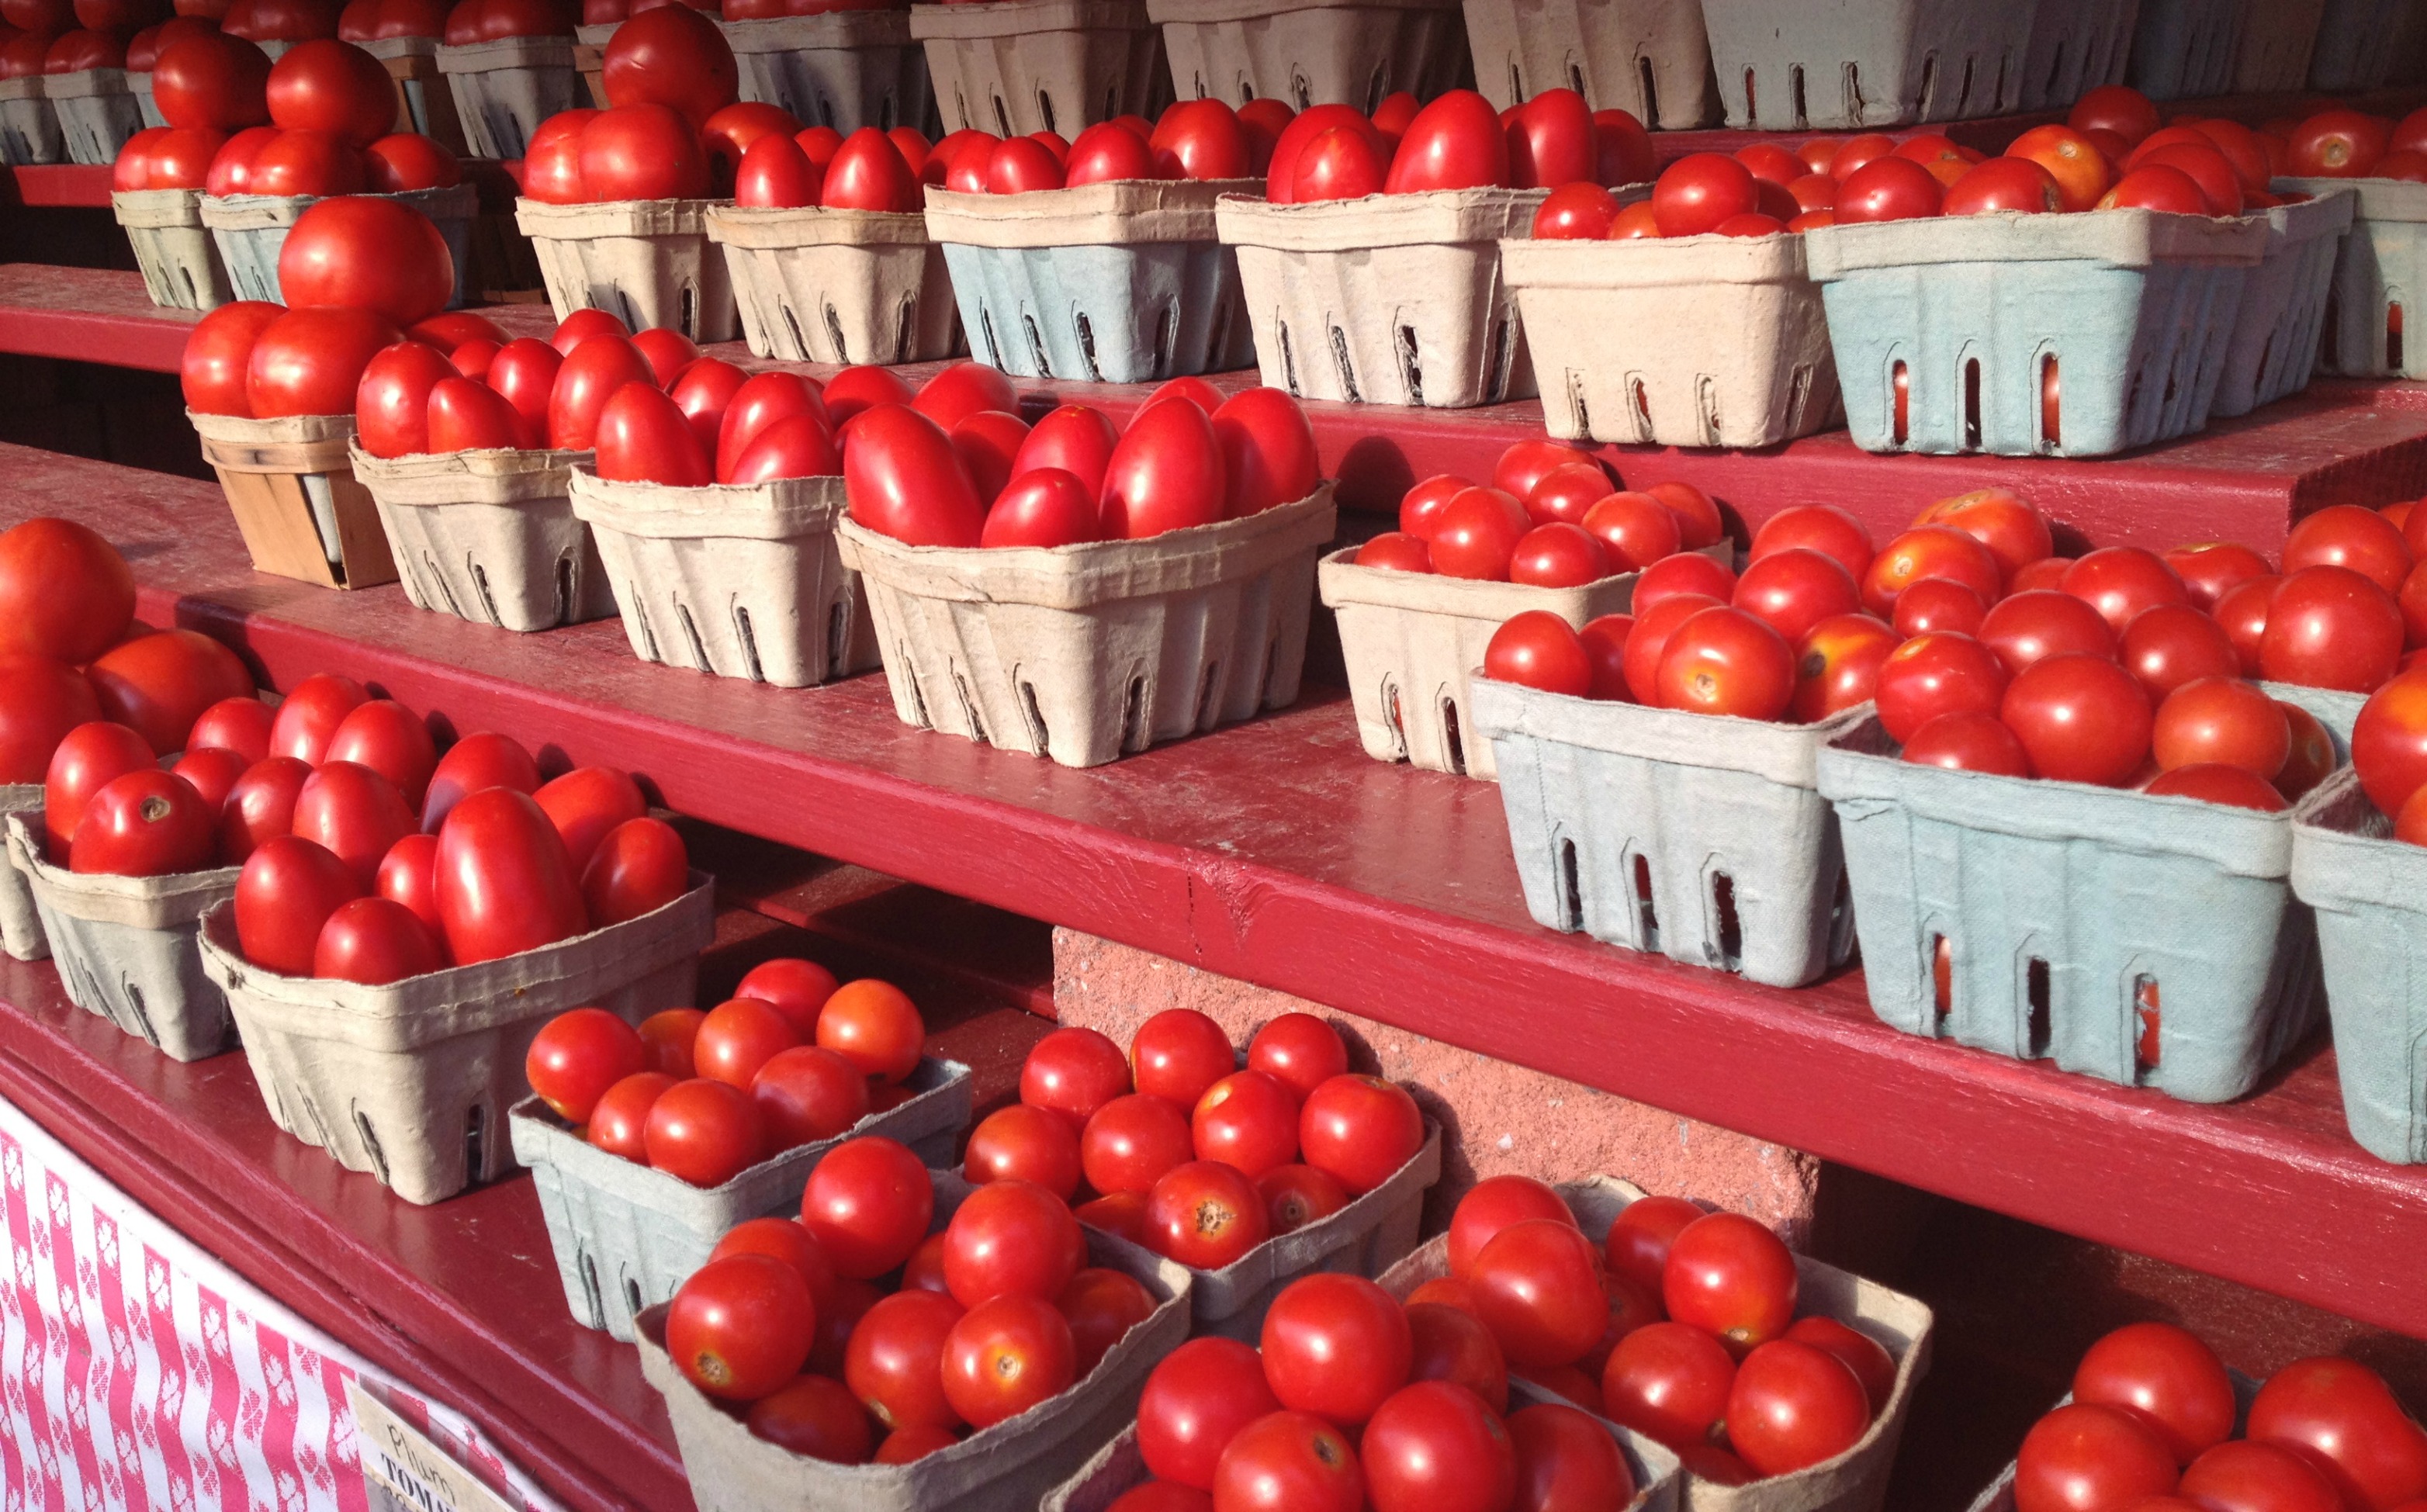 Farm stand tomatoes